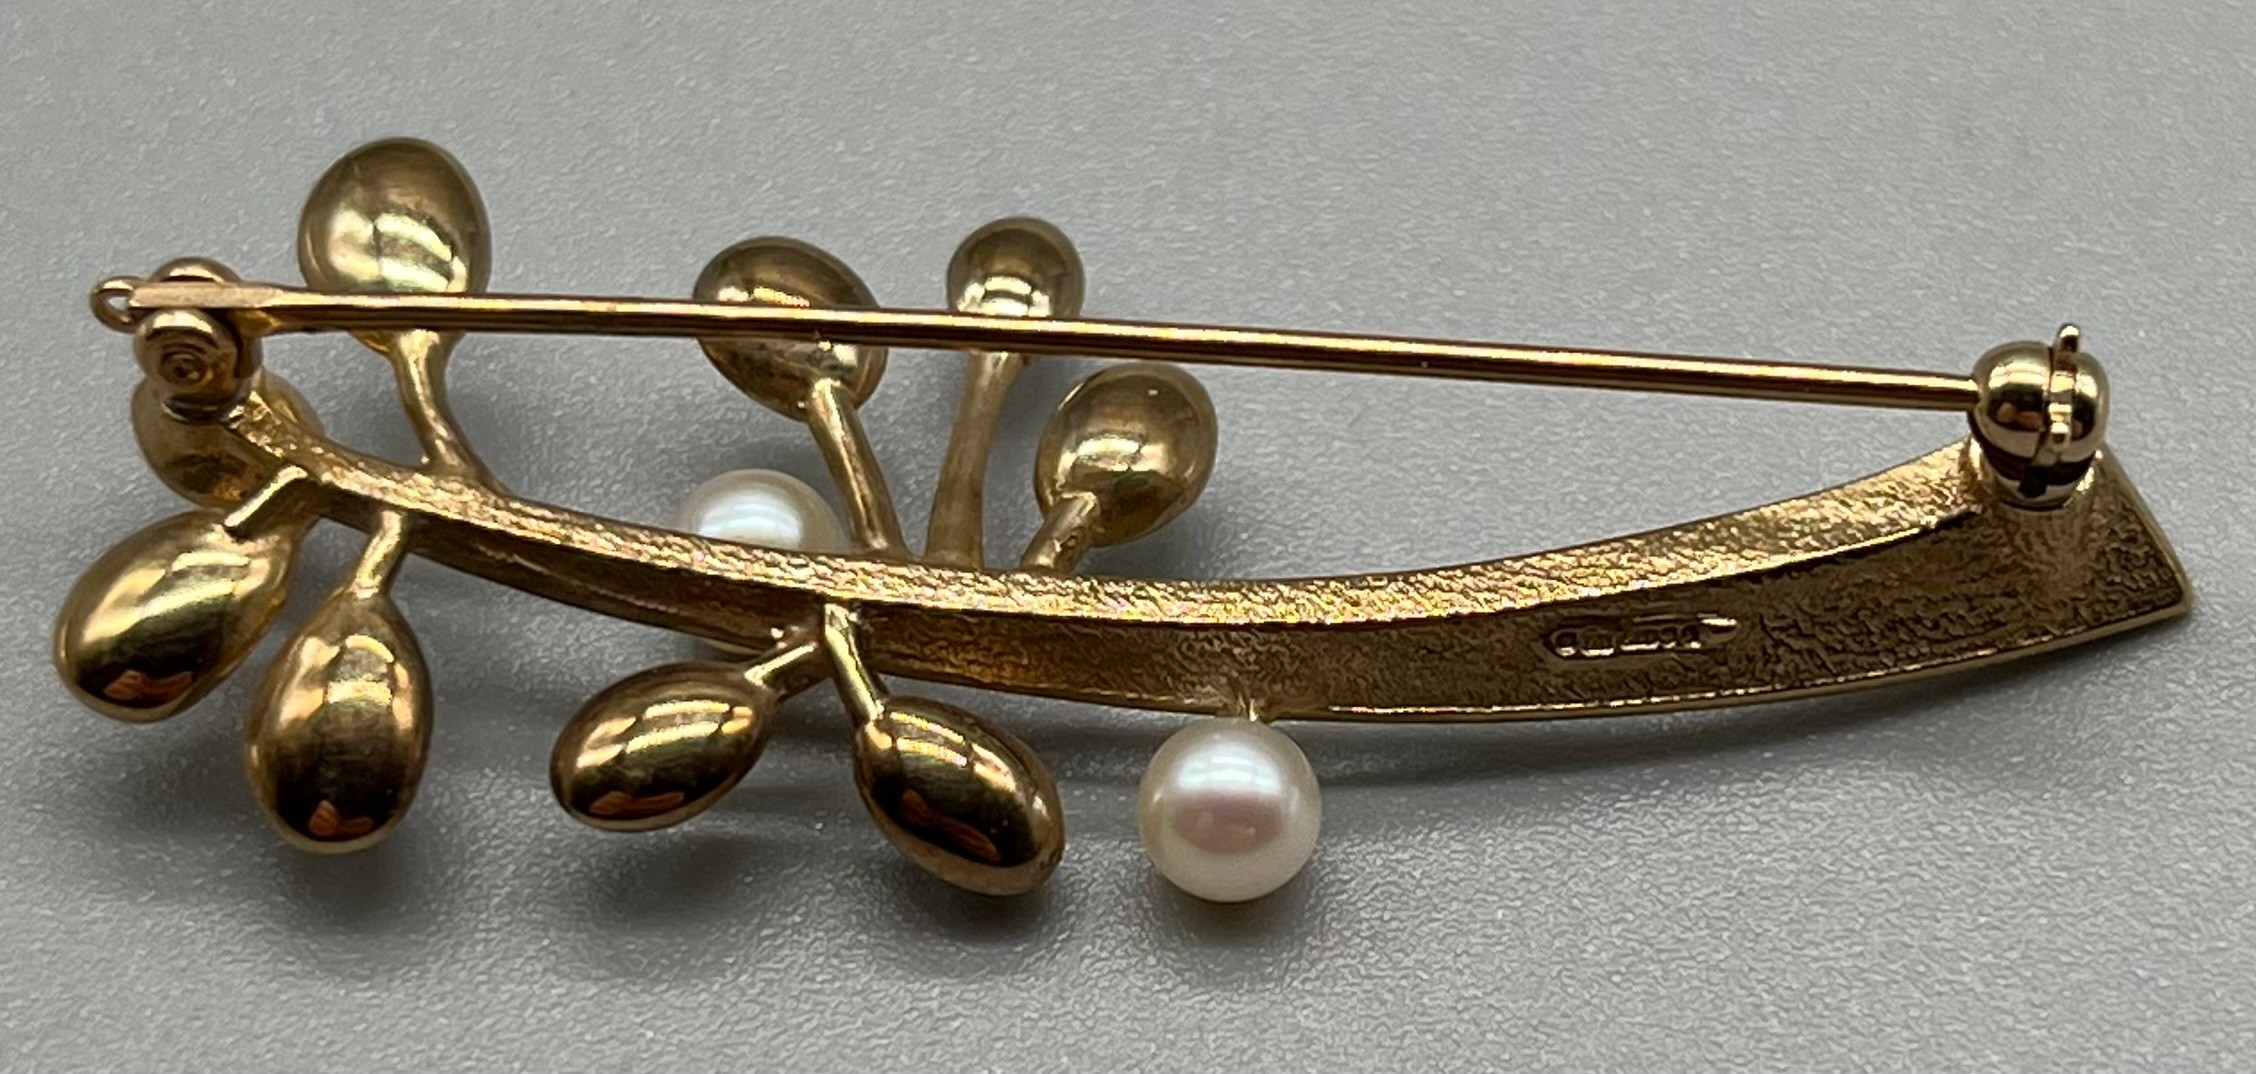 Edinburgh 9ct yellow gold tree shaped brooch fitted with two pearls. [5.86grams] [5cm in length] - Image 2 of 2